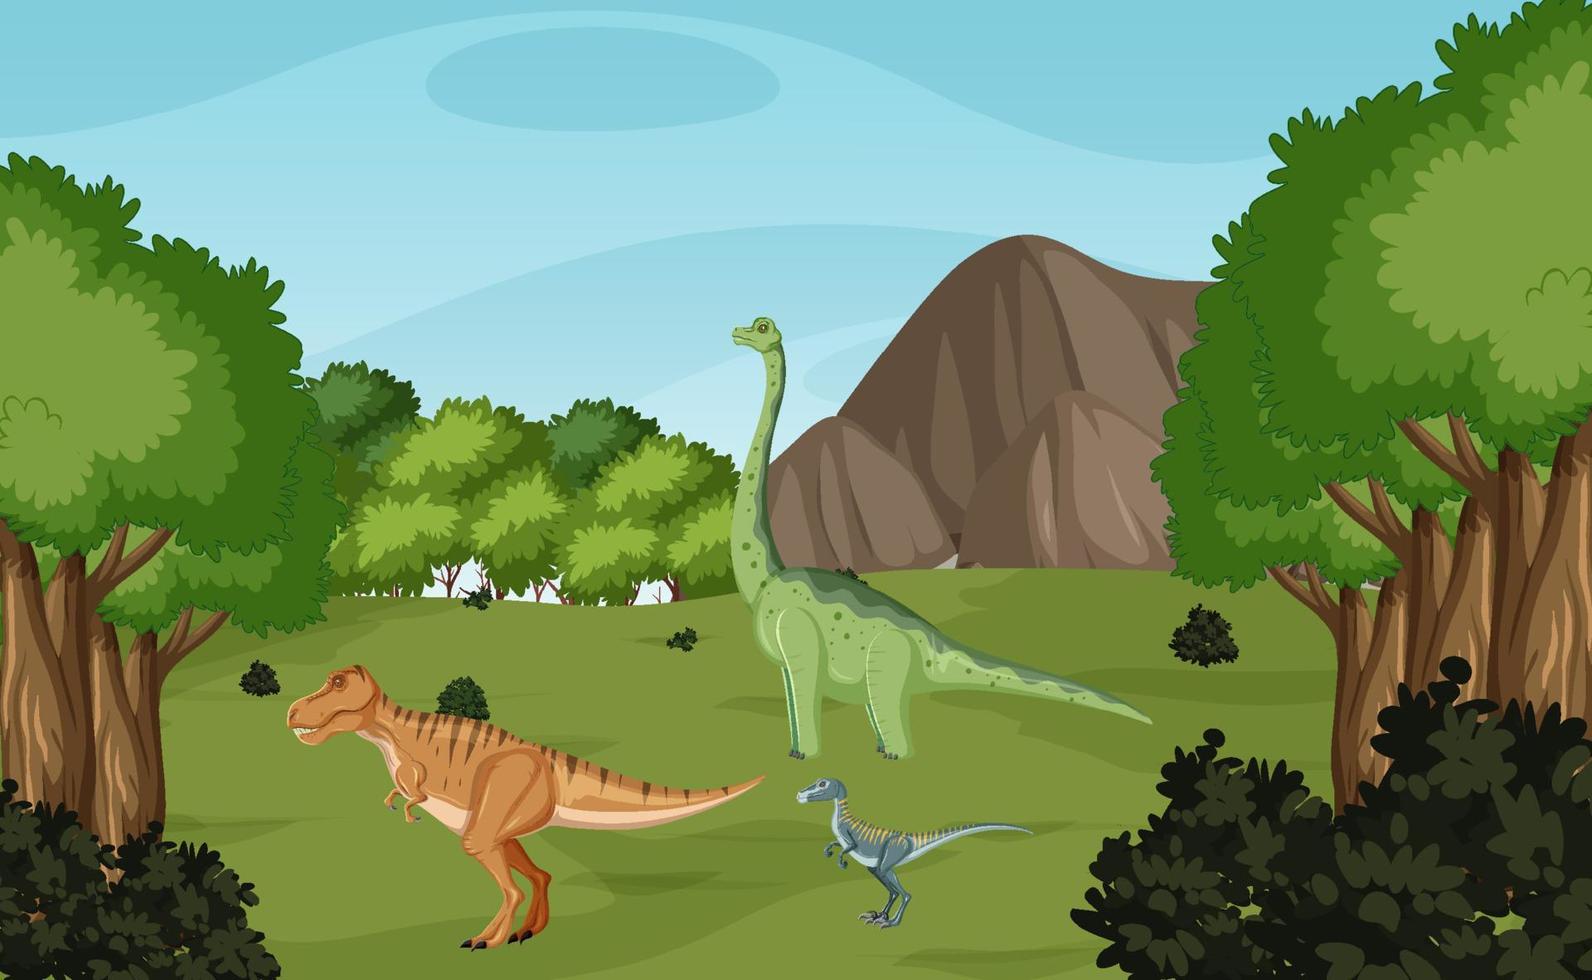 Scene with dinosaurs in the forest vector